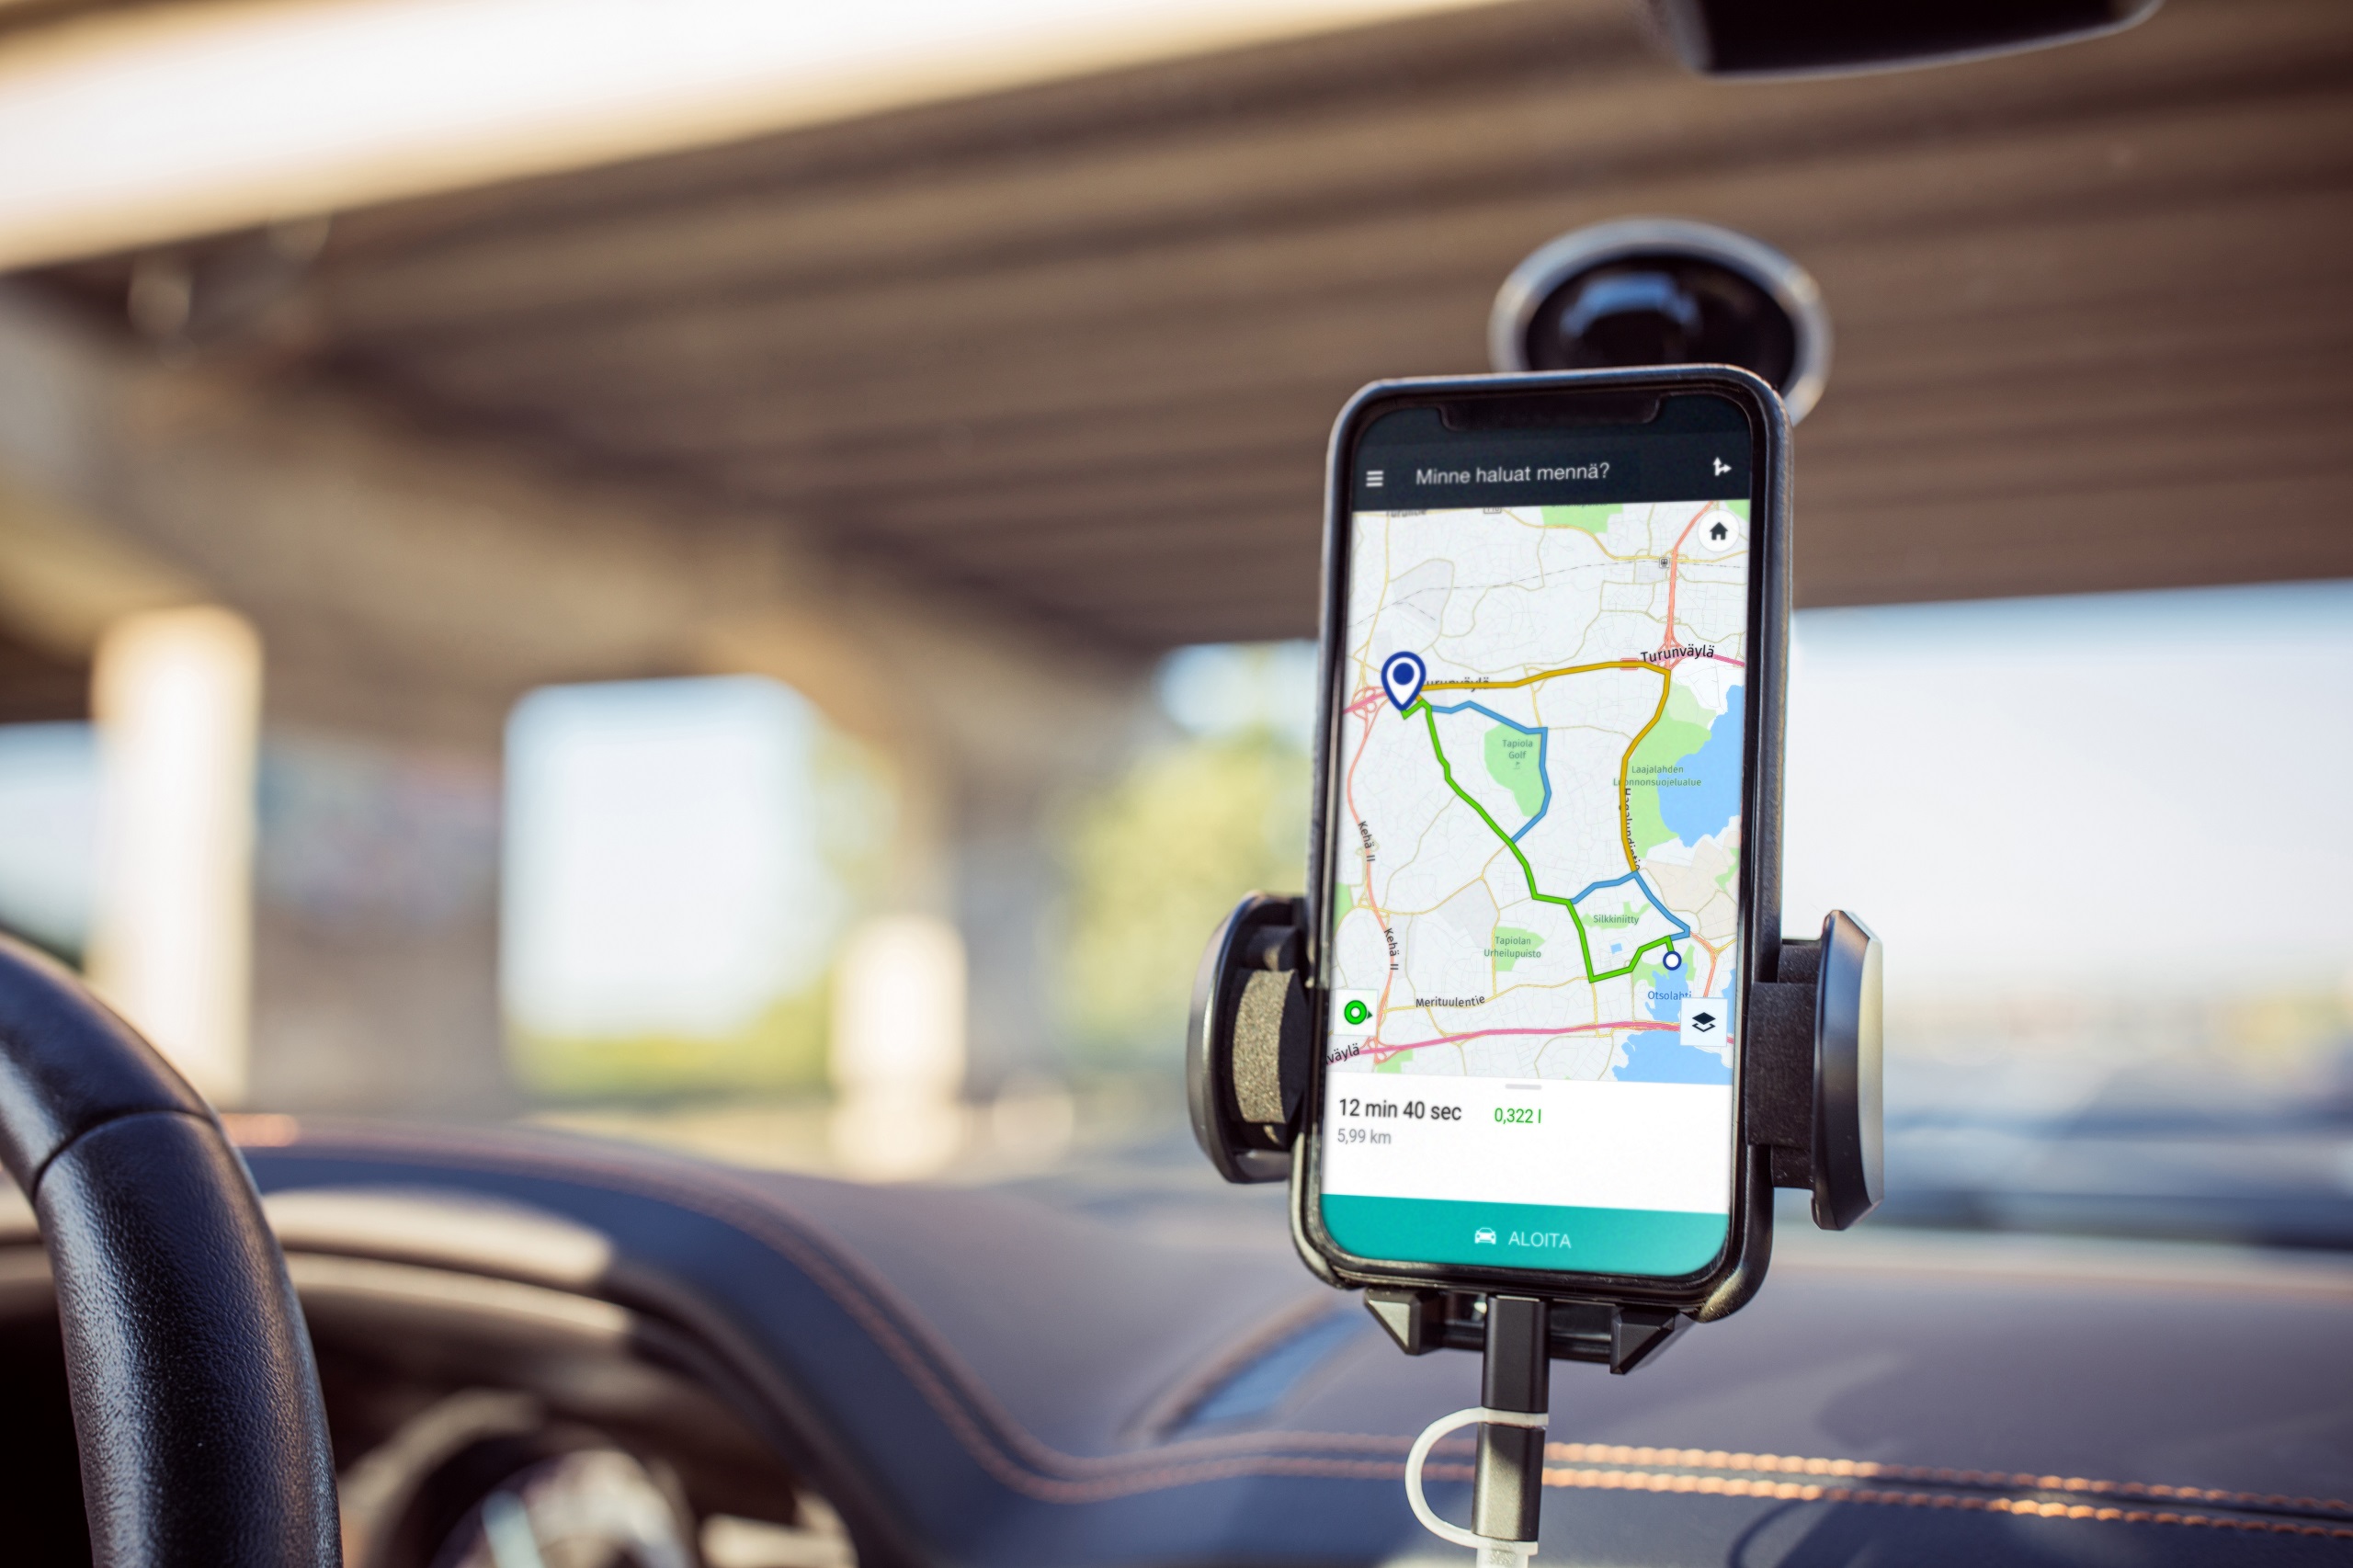 The mobile phone is placed in a holder in the car. The mobile phone image shows the driving route, the time it takes to drive to the destination and the route length. 